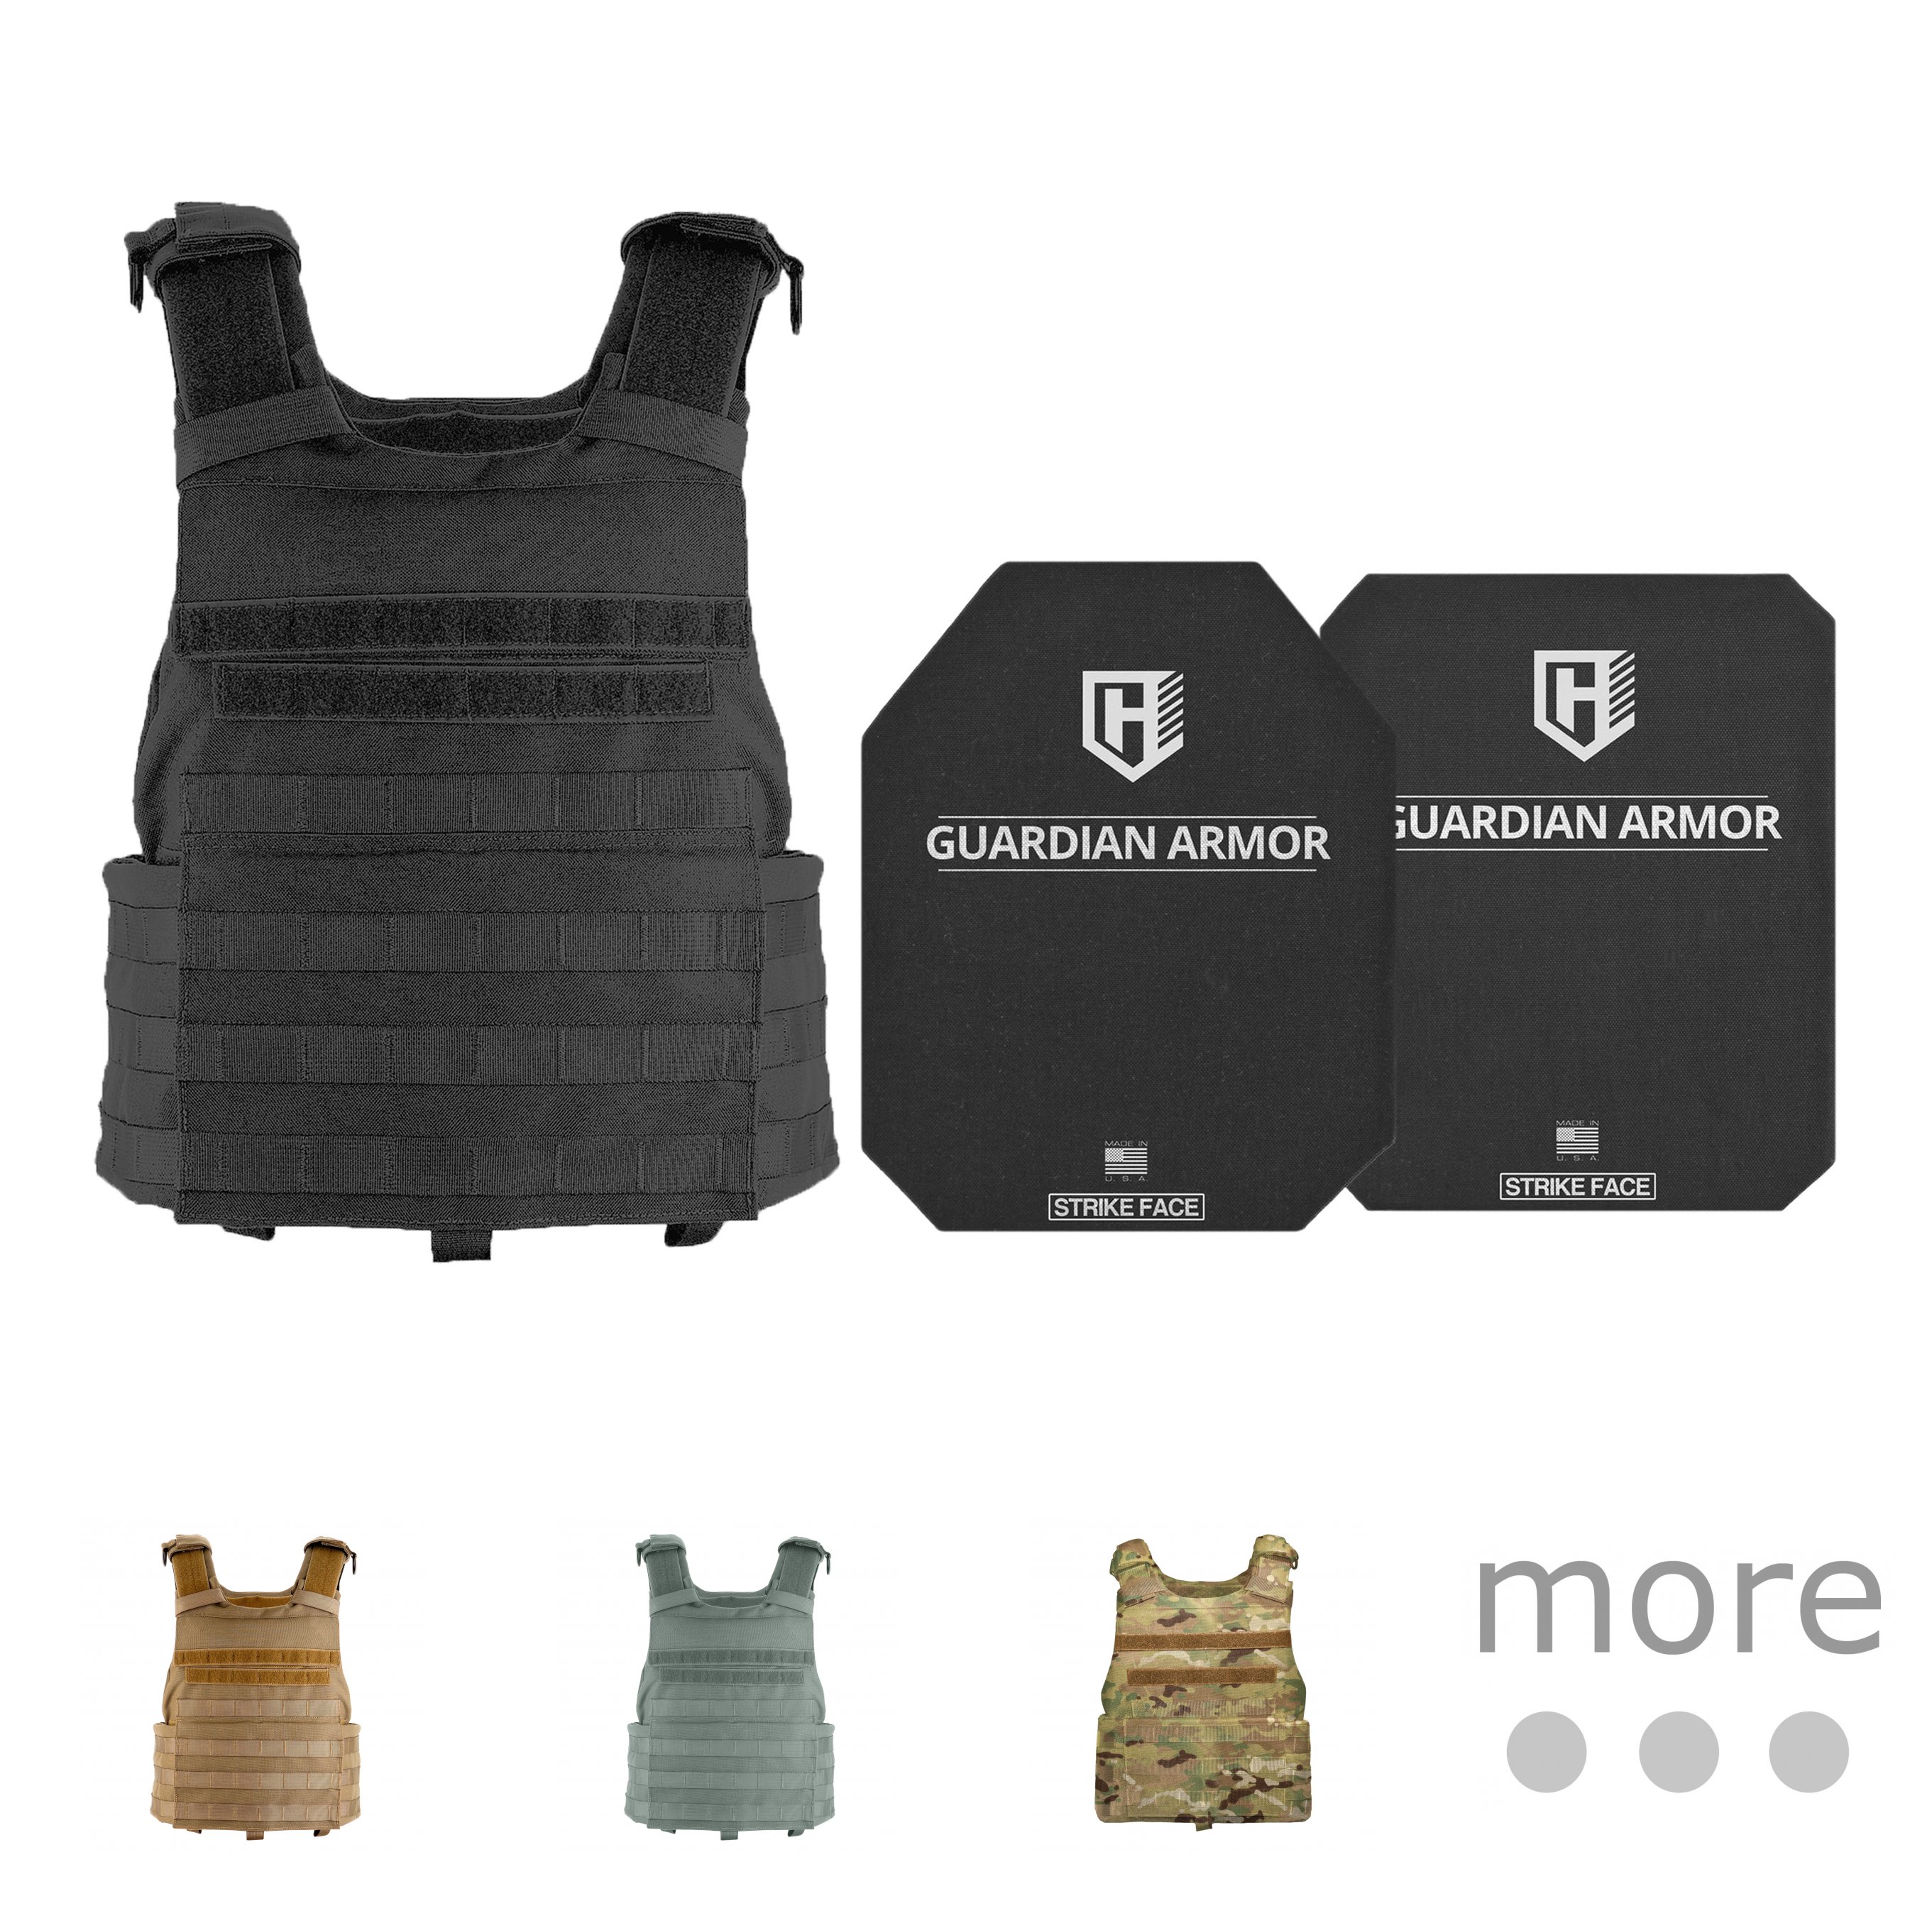 Quadrelease 2.0 Plate Carrier w/ Level III Armor Plates - Ace Link